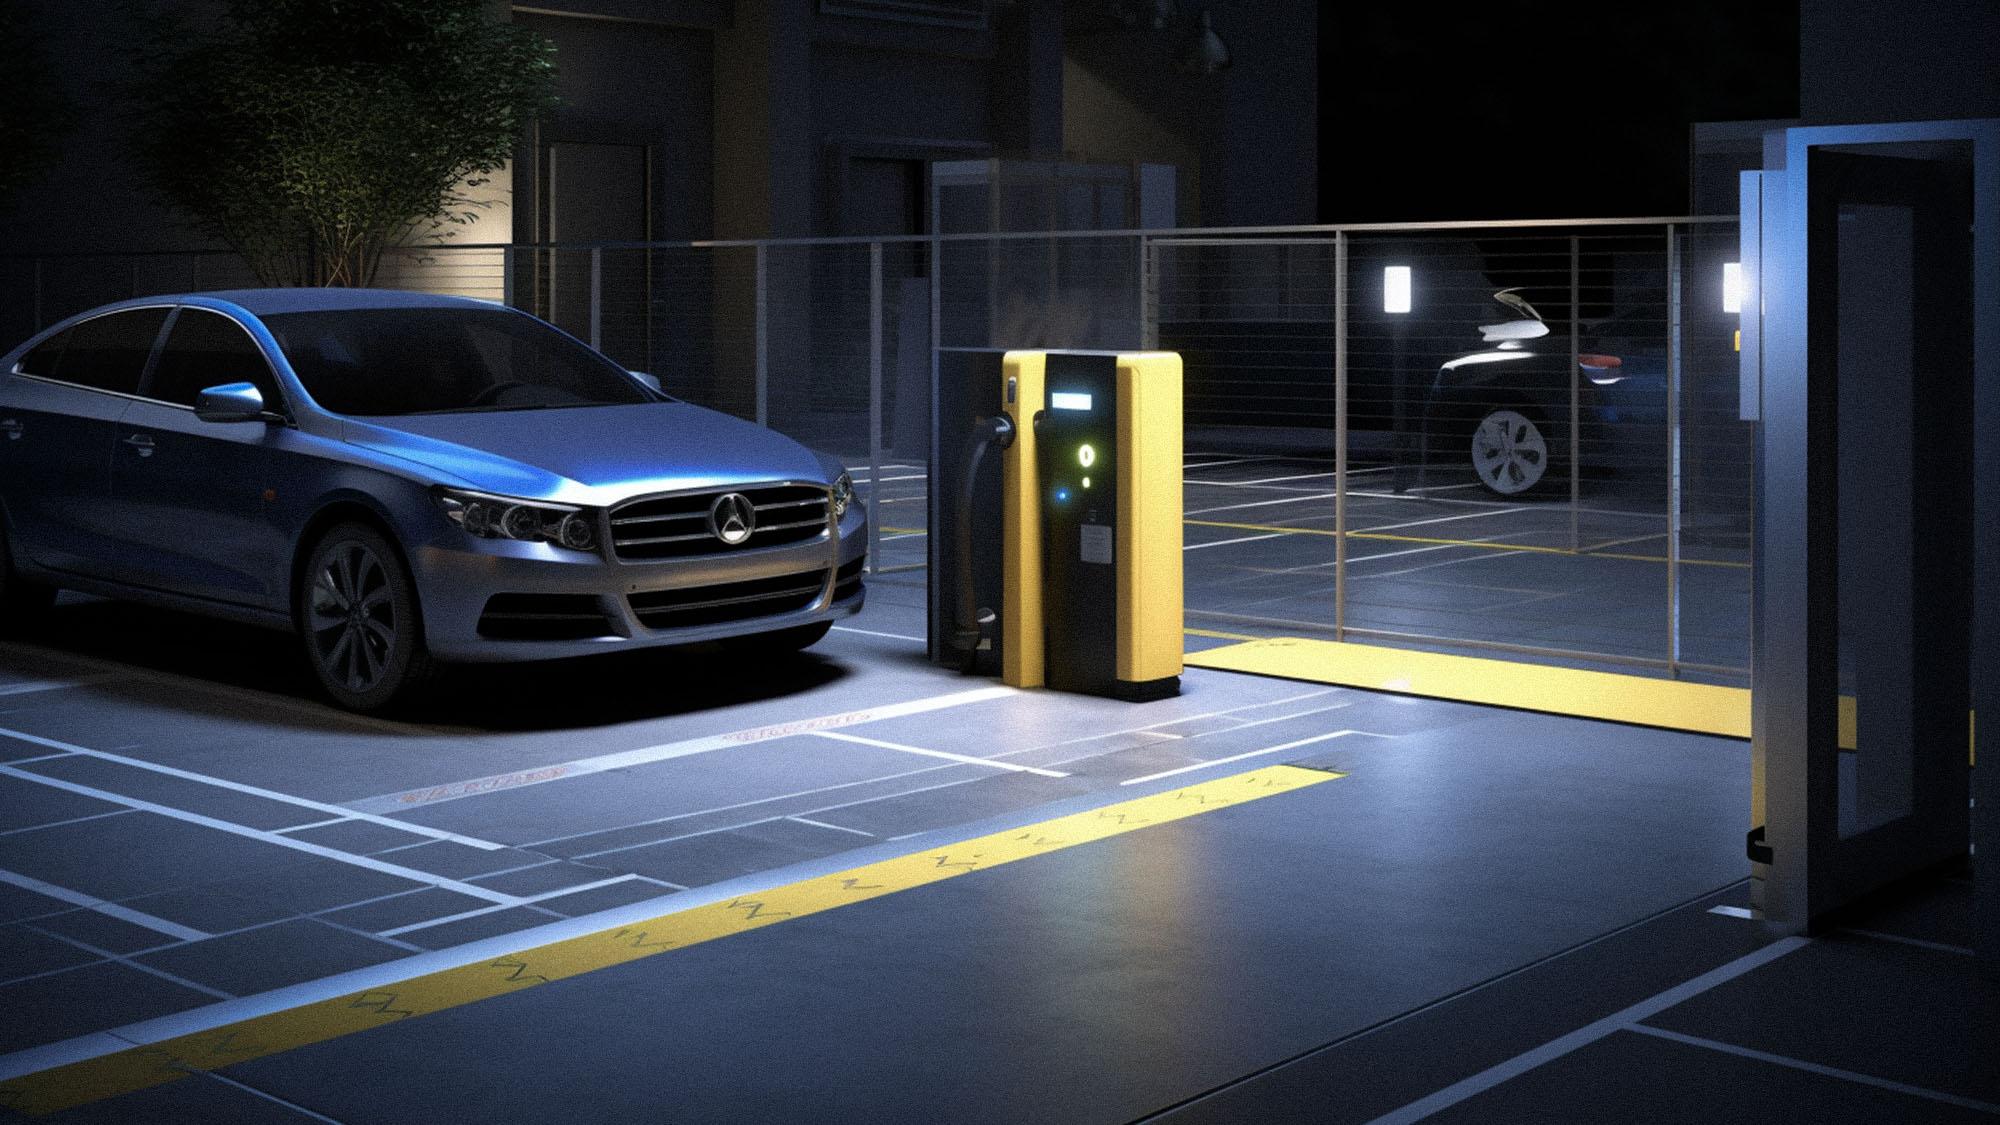 Vehicle Gate Access Control Systems